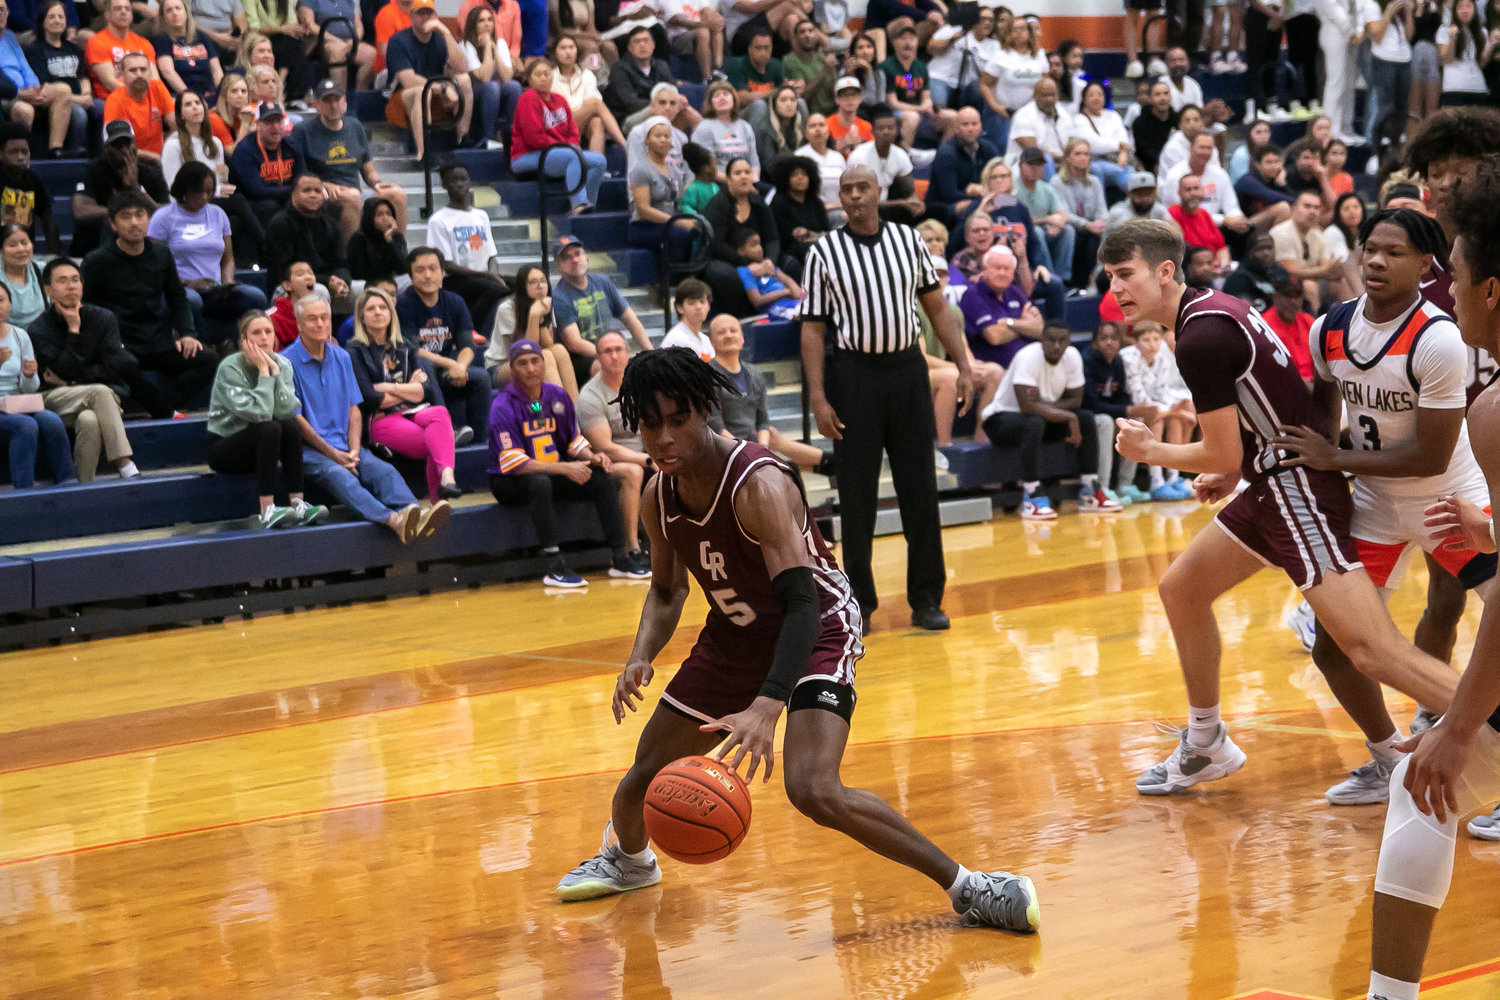 Emmanuel Gregory dribbles during Saturday's game between Seven Lakes and Cinco Ranch at the Seven Lakes gym.